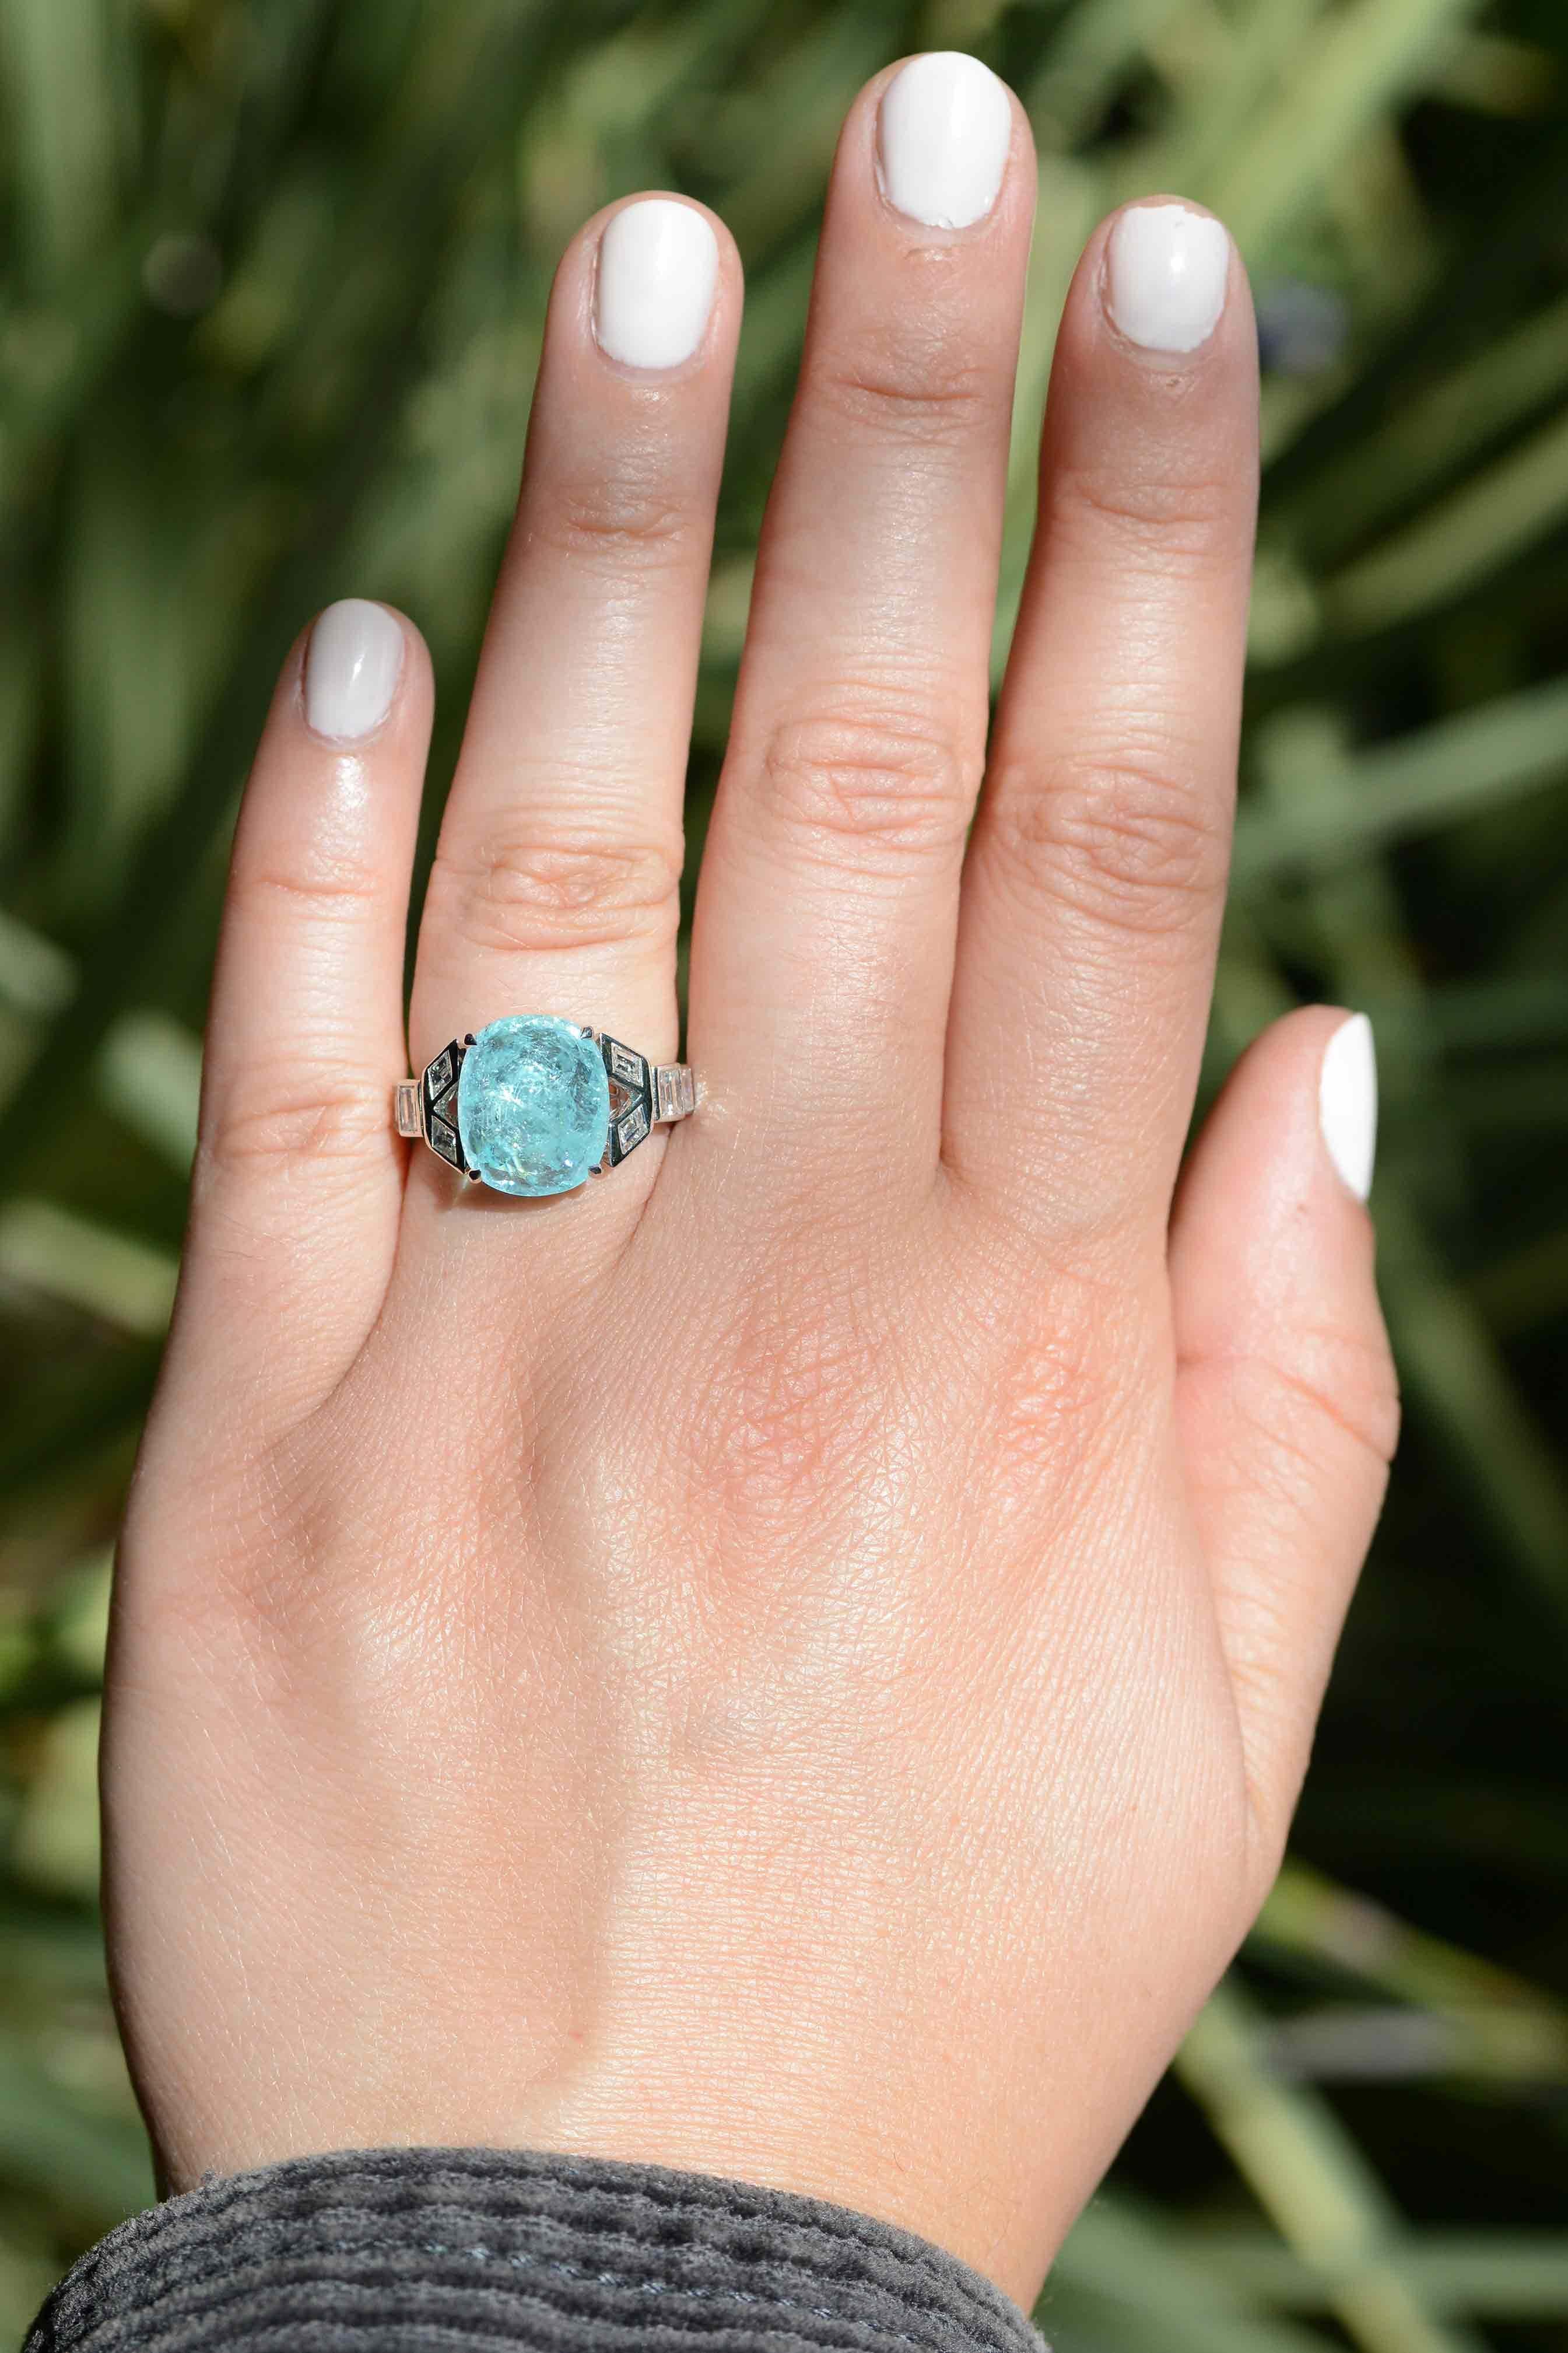 The Pedrina 5 carat Paraiba tourmaline engagement ring is absolutely incredible. A rare and prestigious sugarloaf cabochon cut gemstone that is highly prized for its unique, distinctive color. This one particularly displays an enthralling icy blue